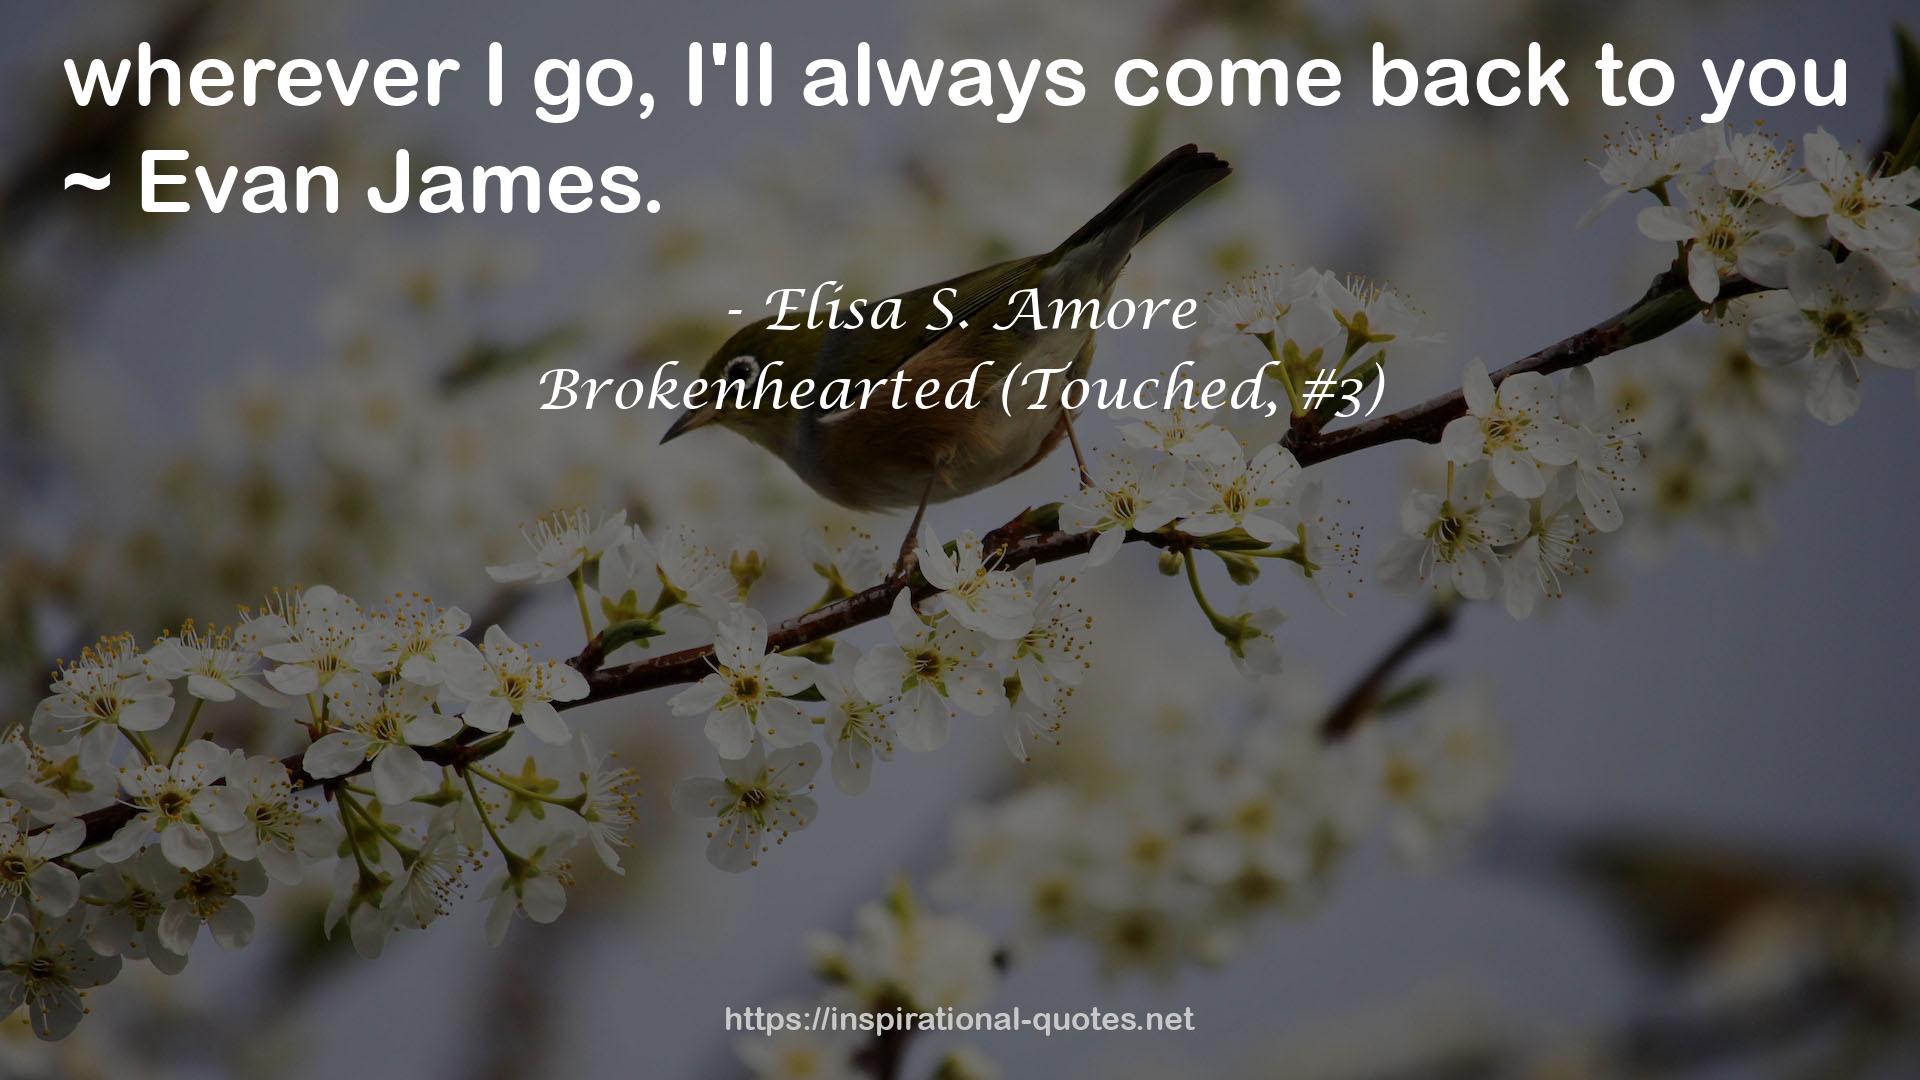 Brokenhearted (Touched, #3) QUOTES